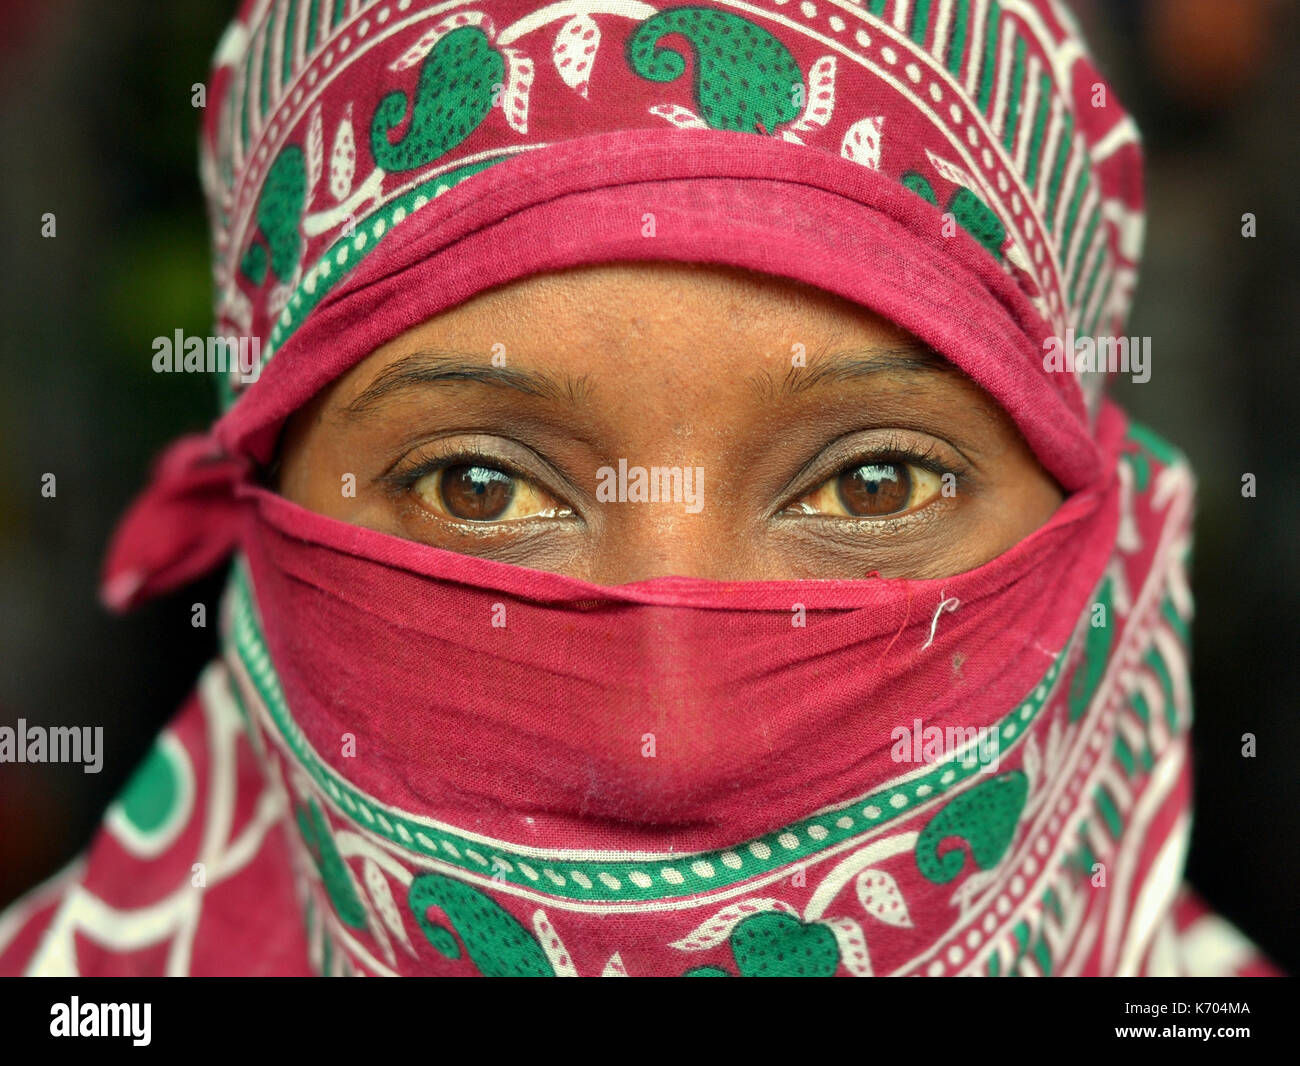 Mature Indian woman with beautiful brown eyes, covering her hair and face with a trendy secular headscarf; Jagdalpur, Chhattisgarh, India Stock Photo